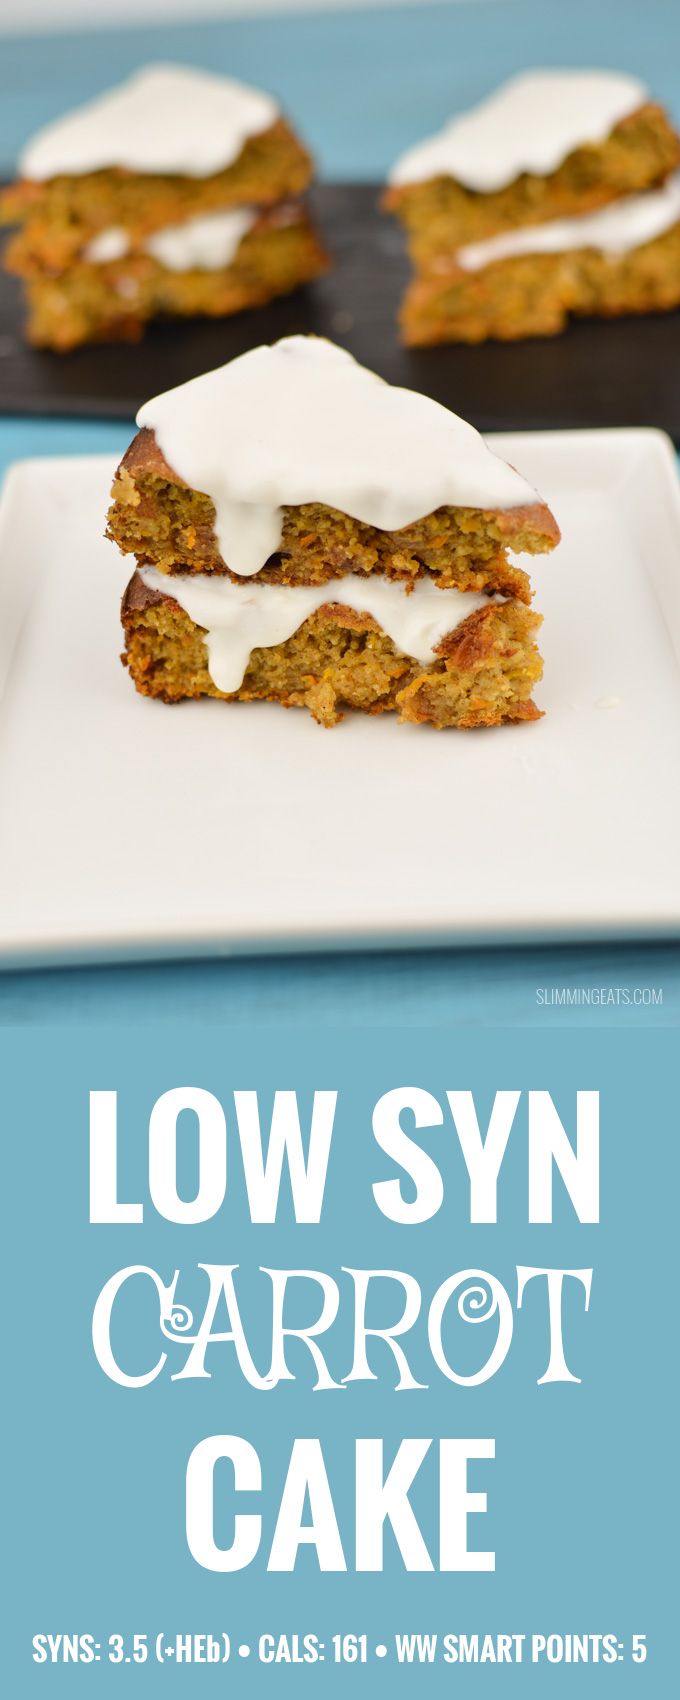 Slimming Eats Best Ever Low Syn Carrot Cake - gluten free, vegetarian Slimming World and Weight Watchers friendly